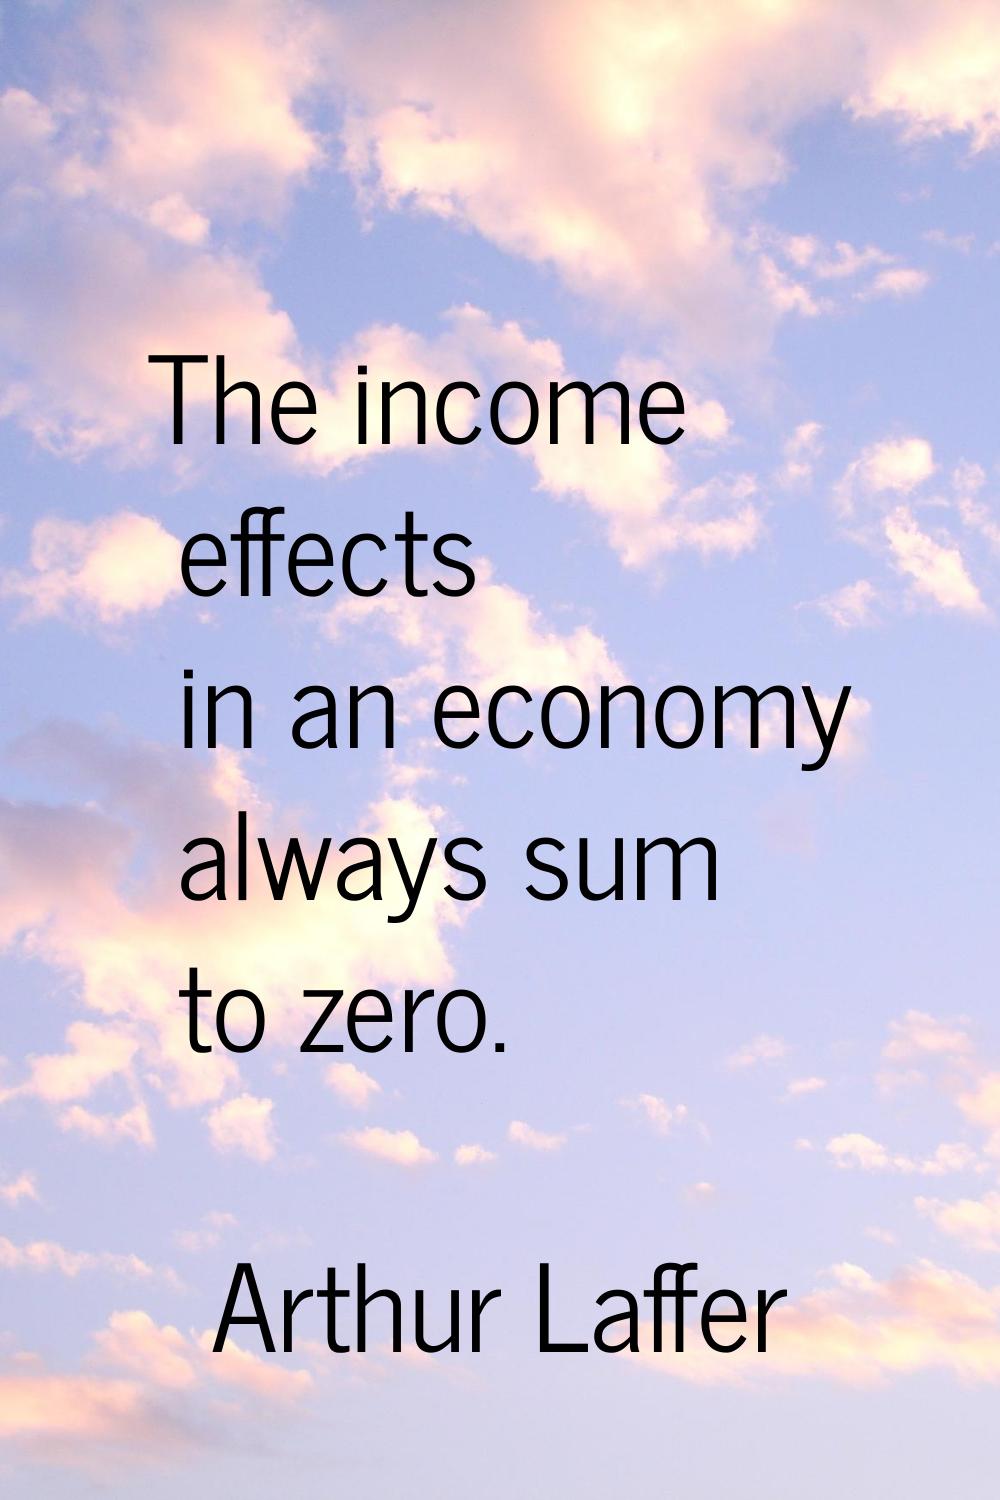 The income effects in an economy always sum to zero.